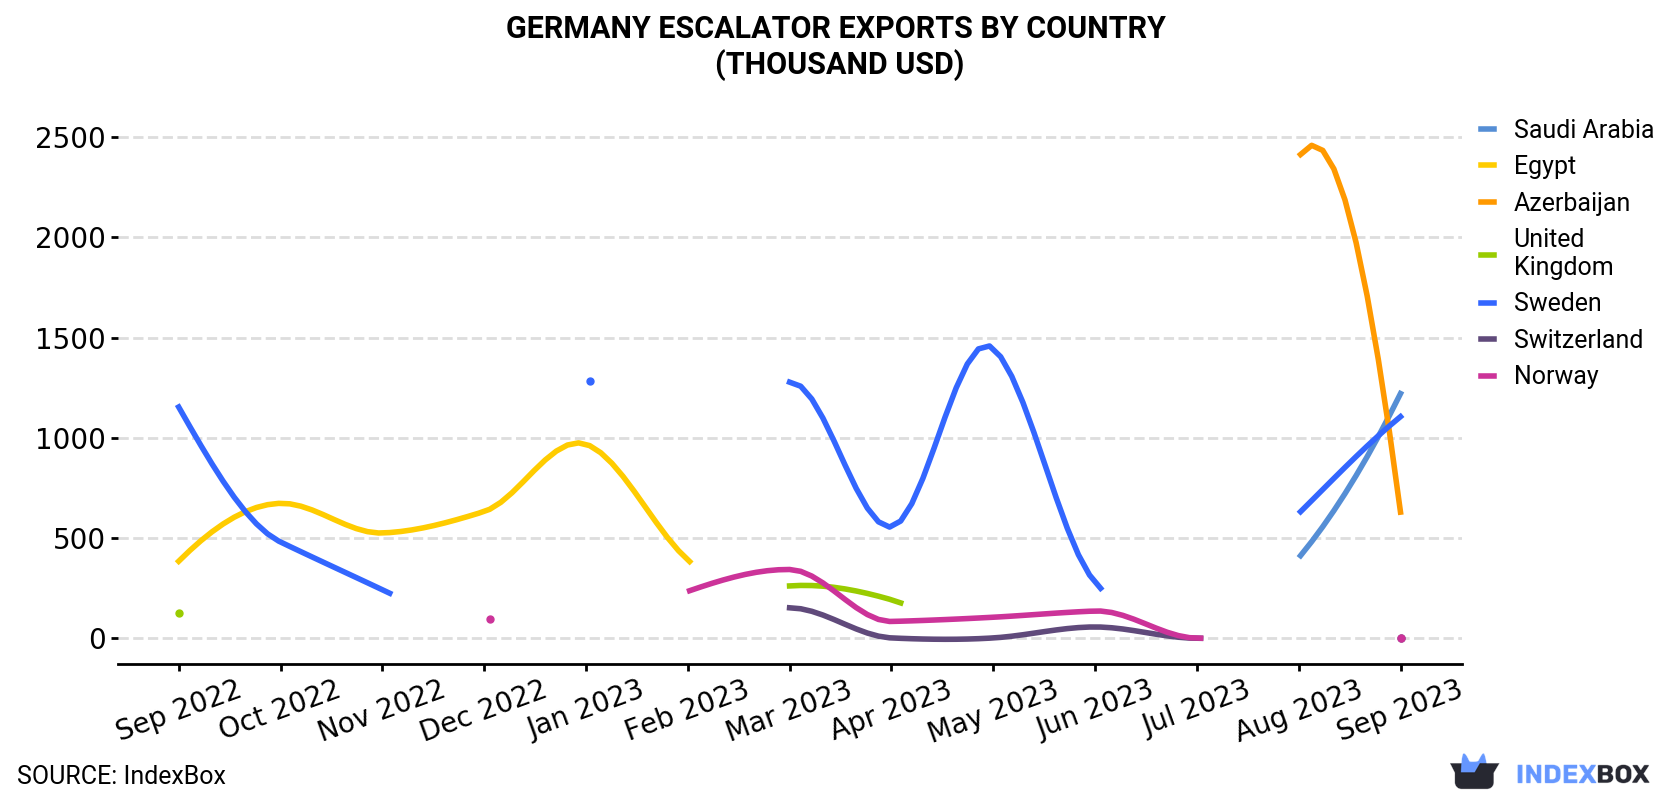 Germany Escalator Exports By Country (Thousand USD)